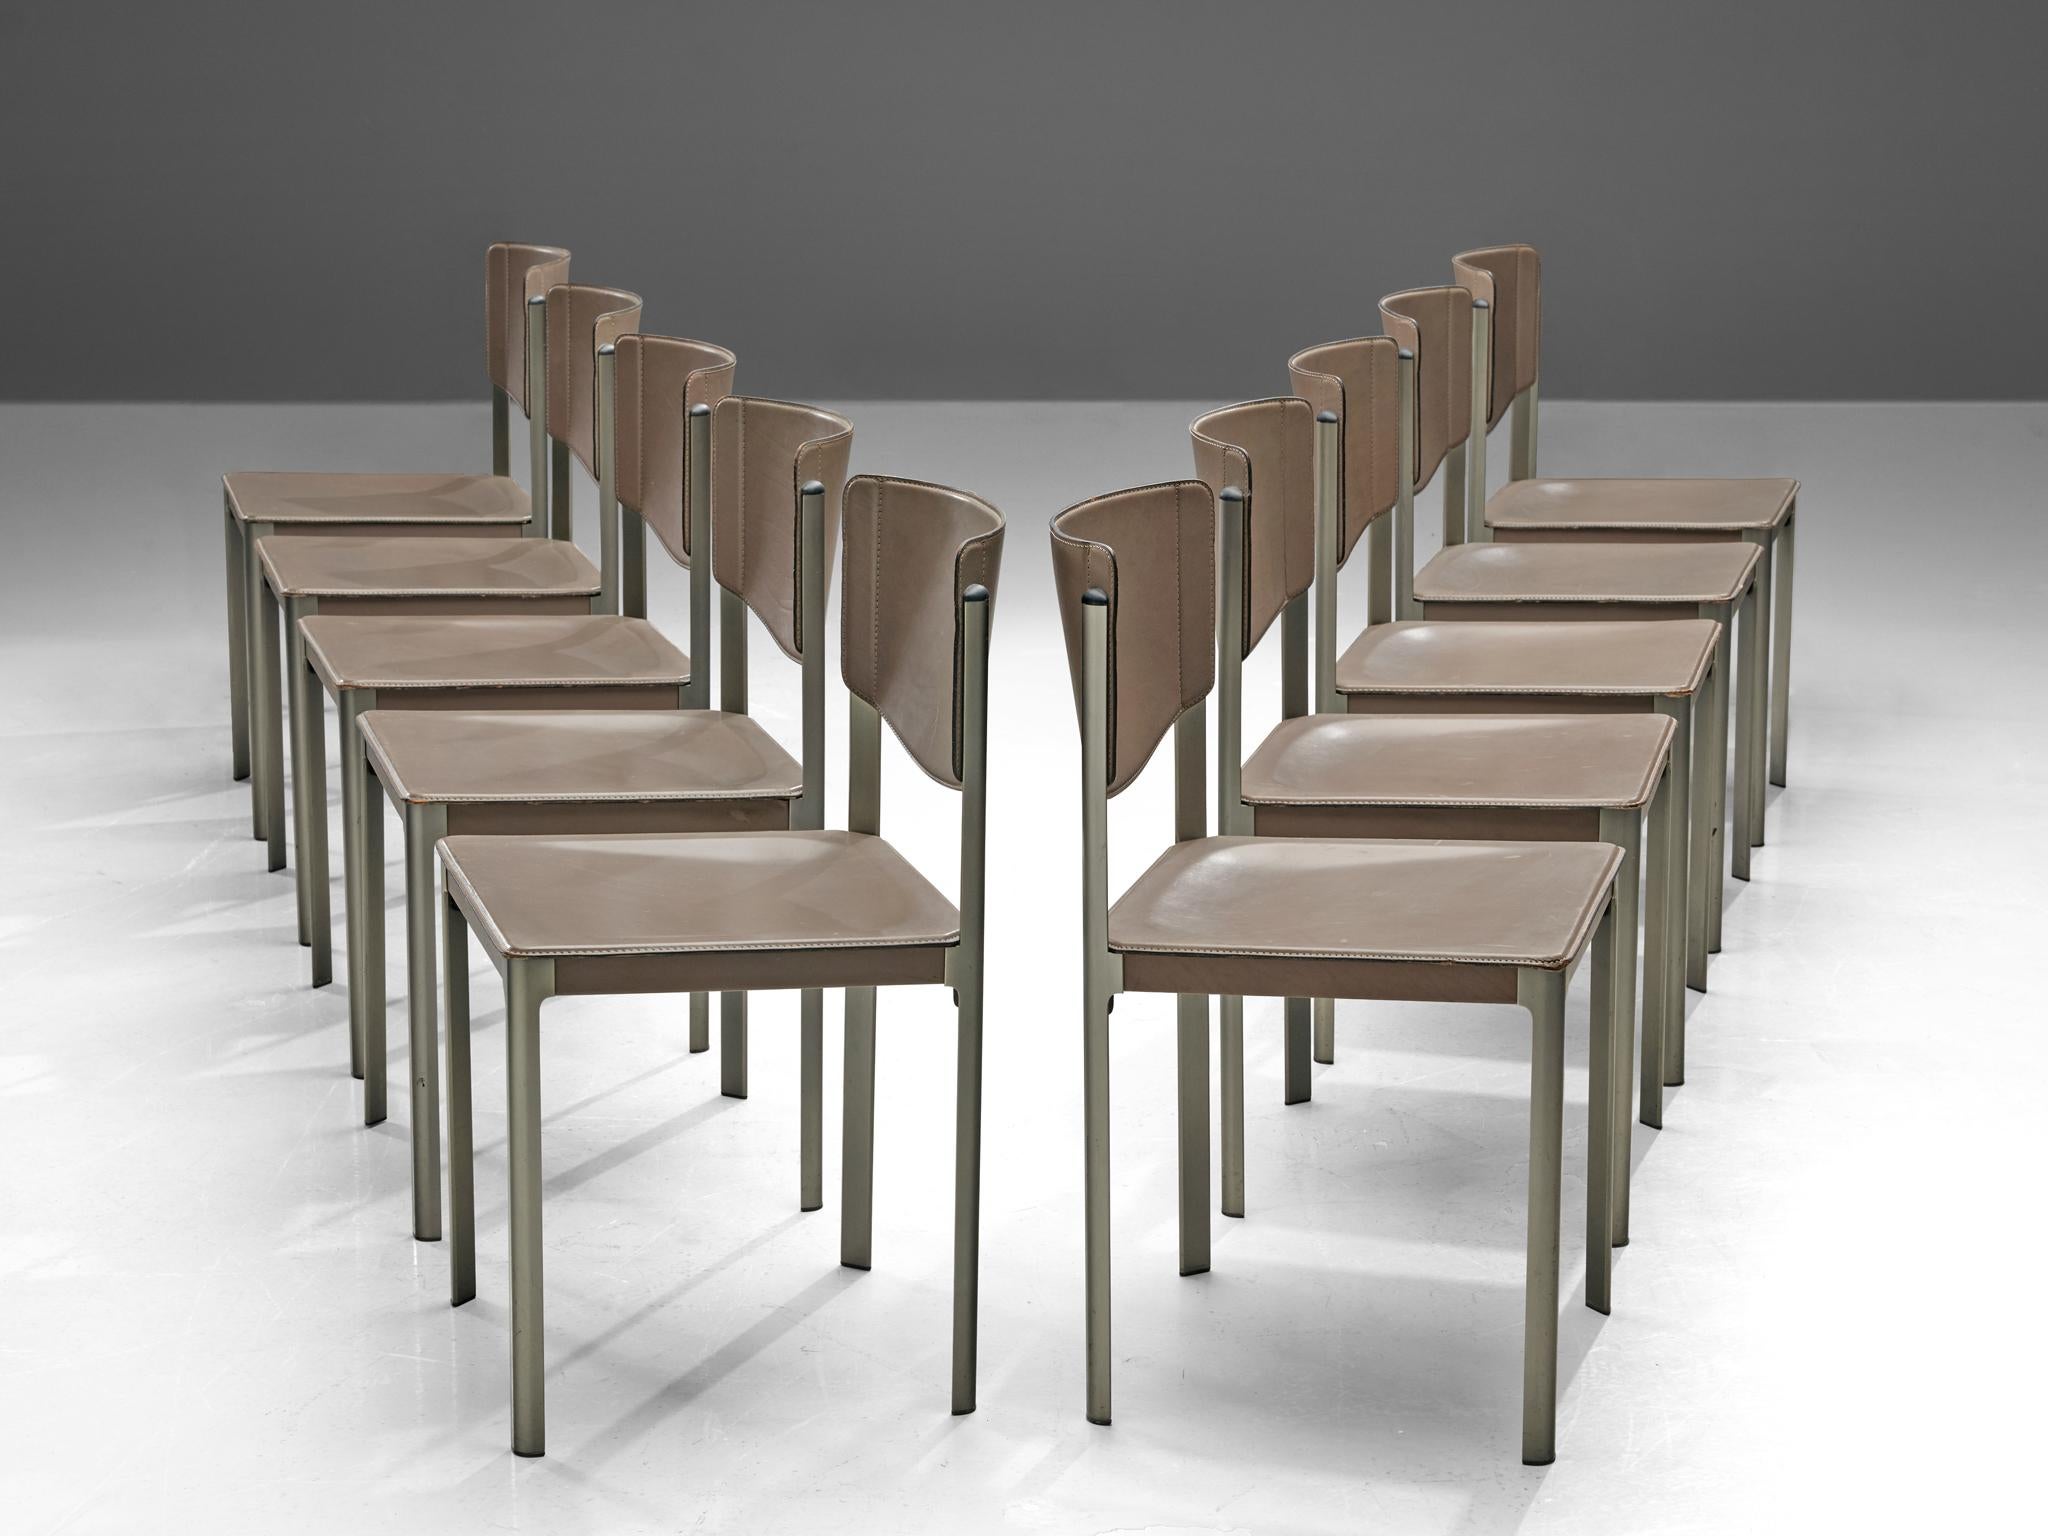 Matteo Grassi, set of ten dining chairs, leather and steel, Italy, 1980s.

Sophisticated set of ten dining chairs designed by Italian designer Matteo Grassi in the 1980s. These chairs feature grey leather upholstery on the backrests and seats. 